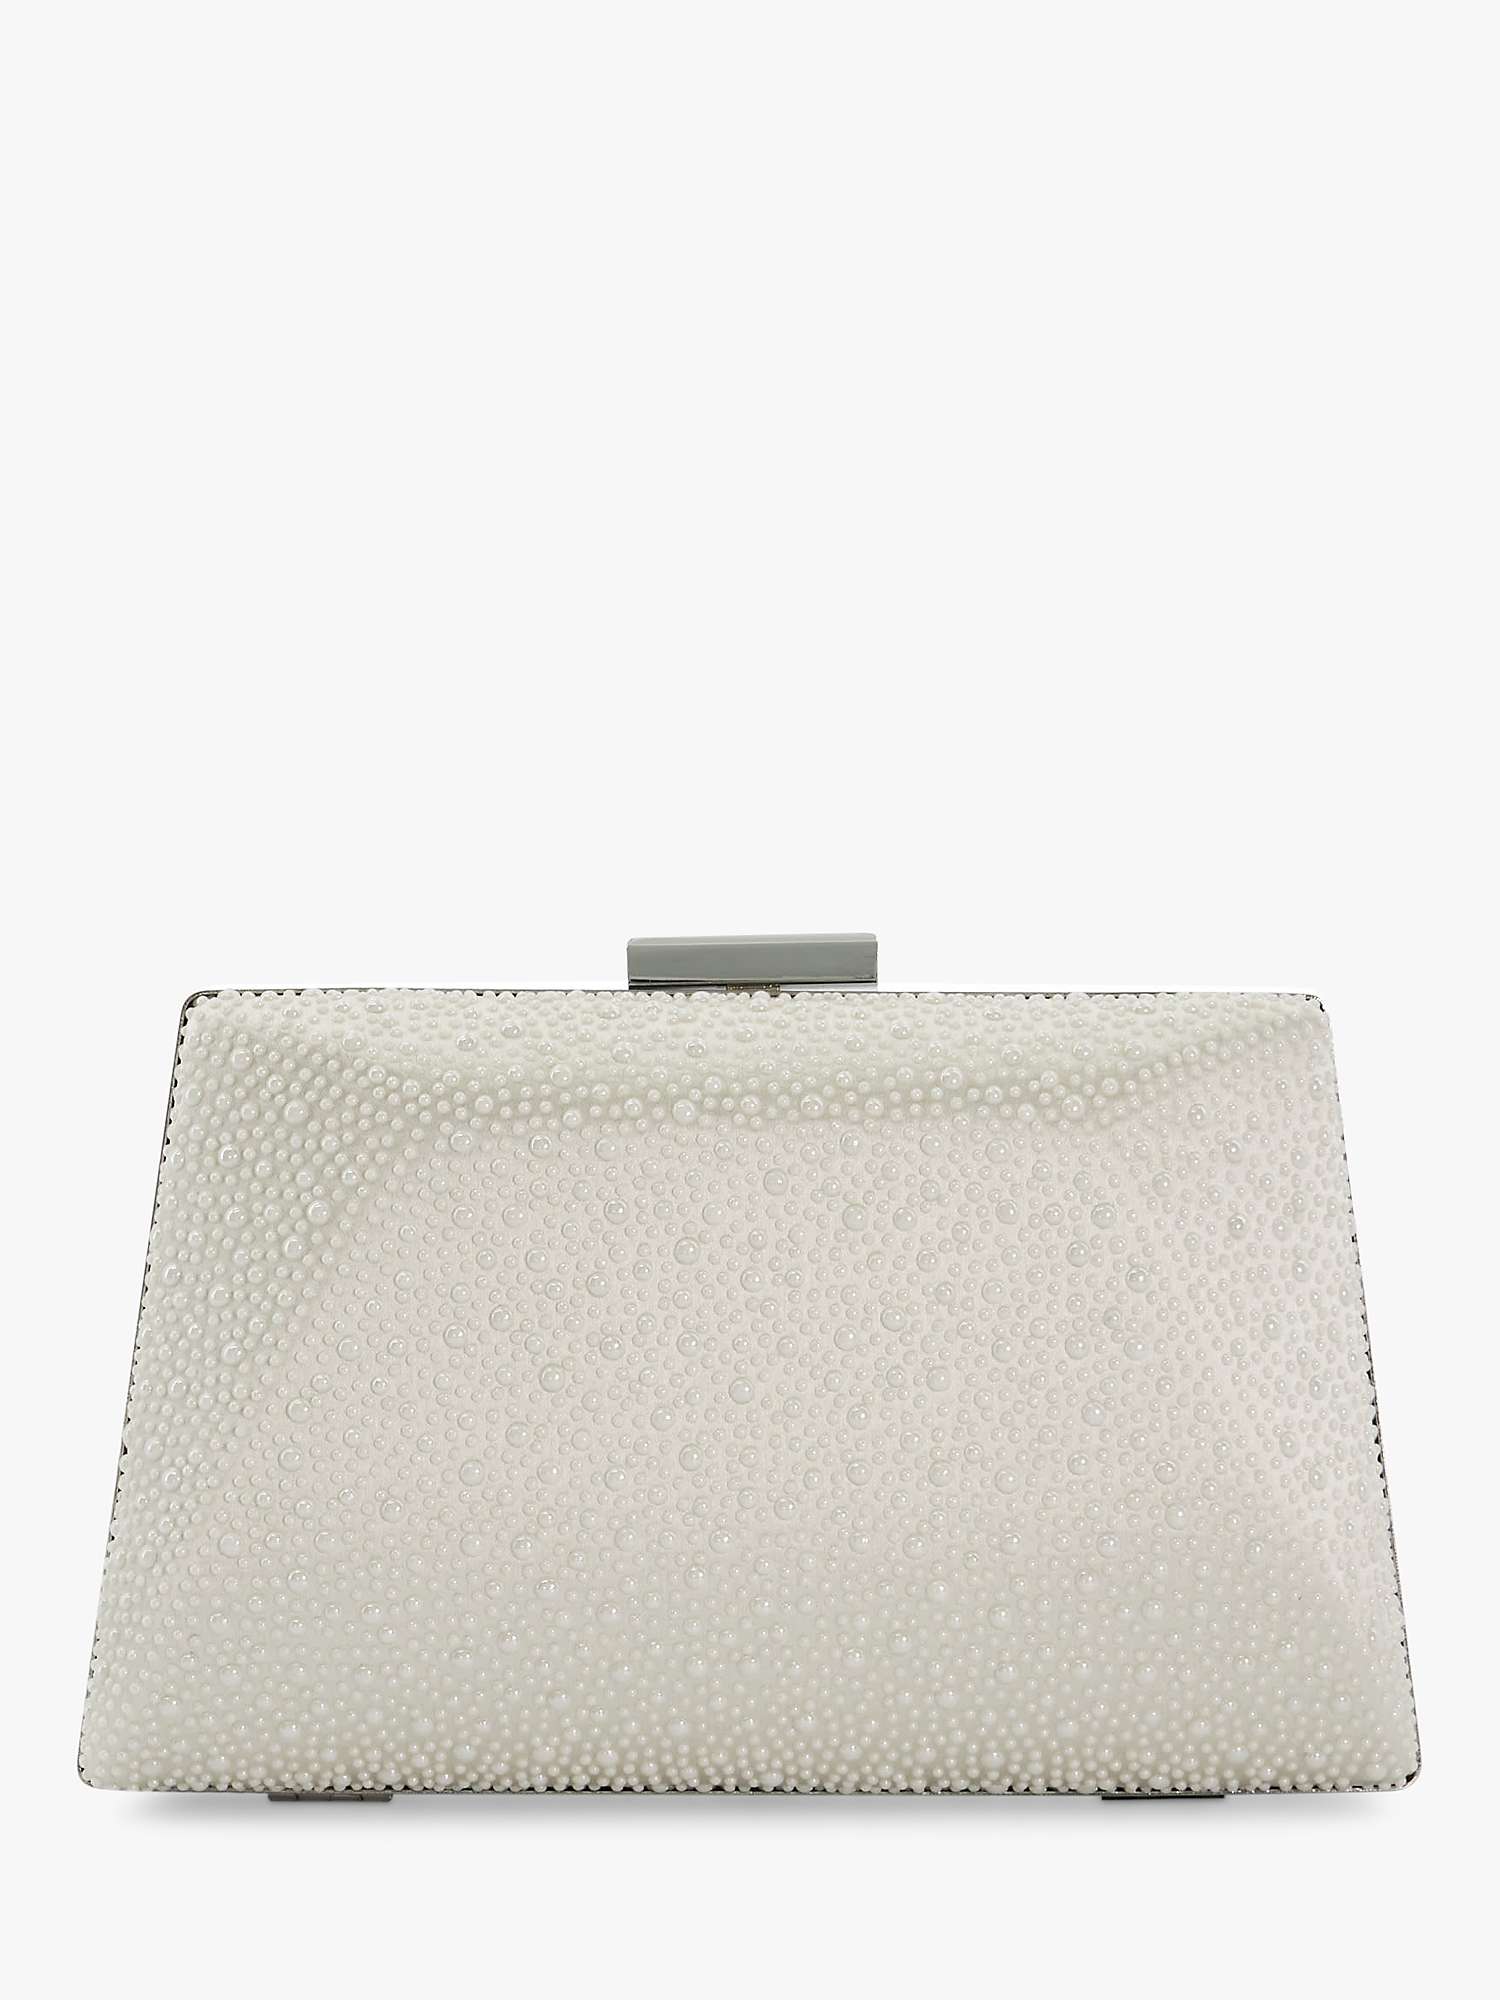 Buy Dune Because Pearl Effect Clutch Bag, Ivory Online at johnlewis.com